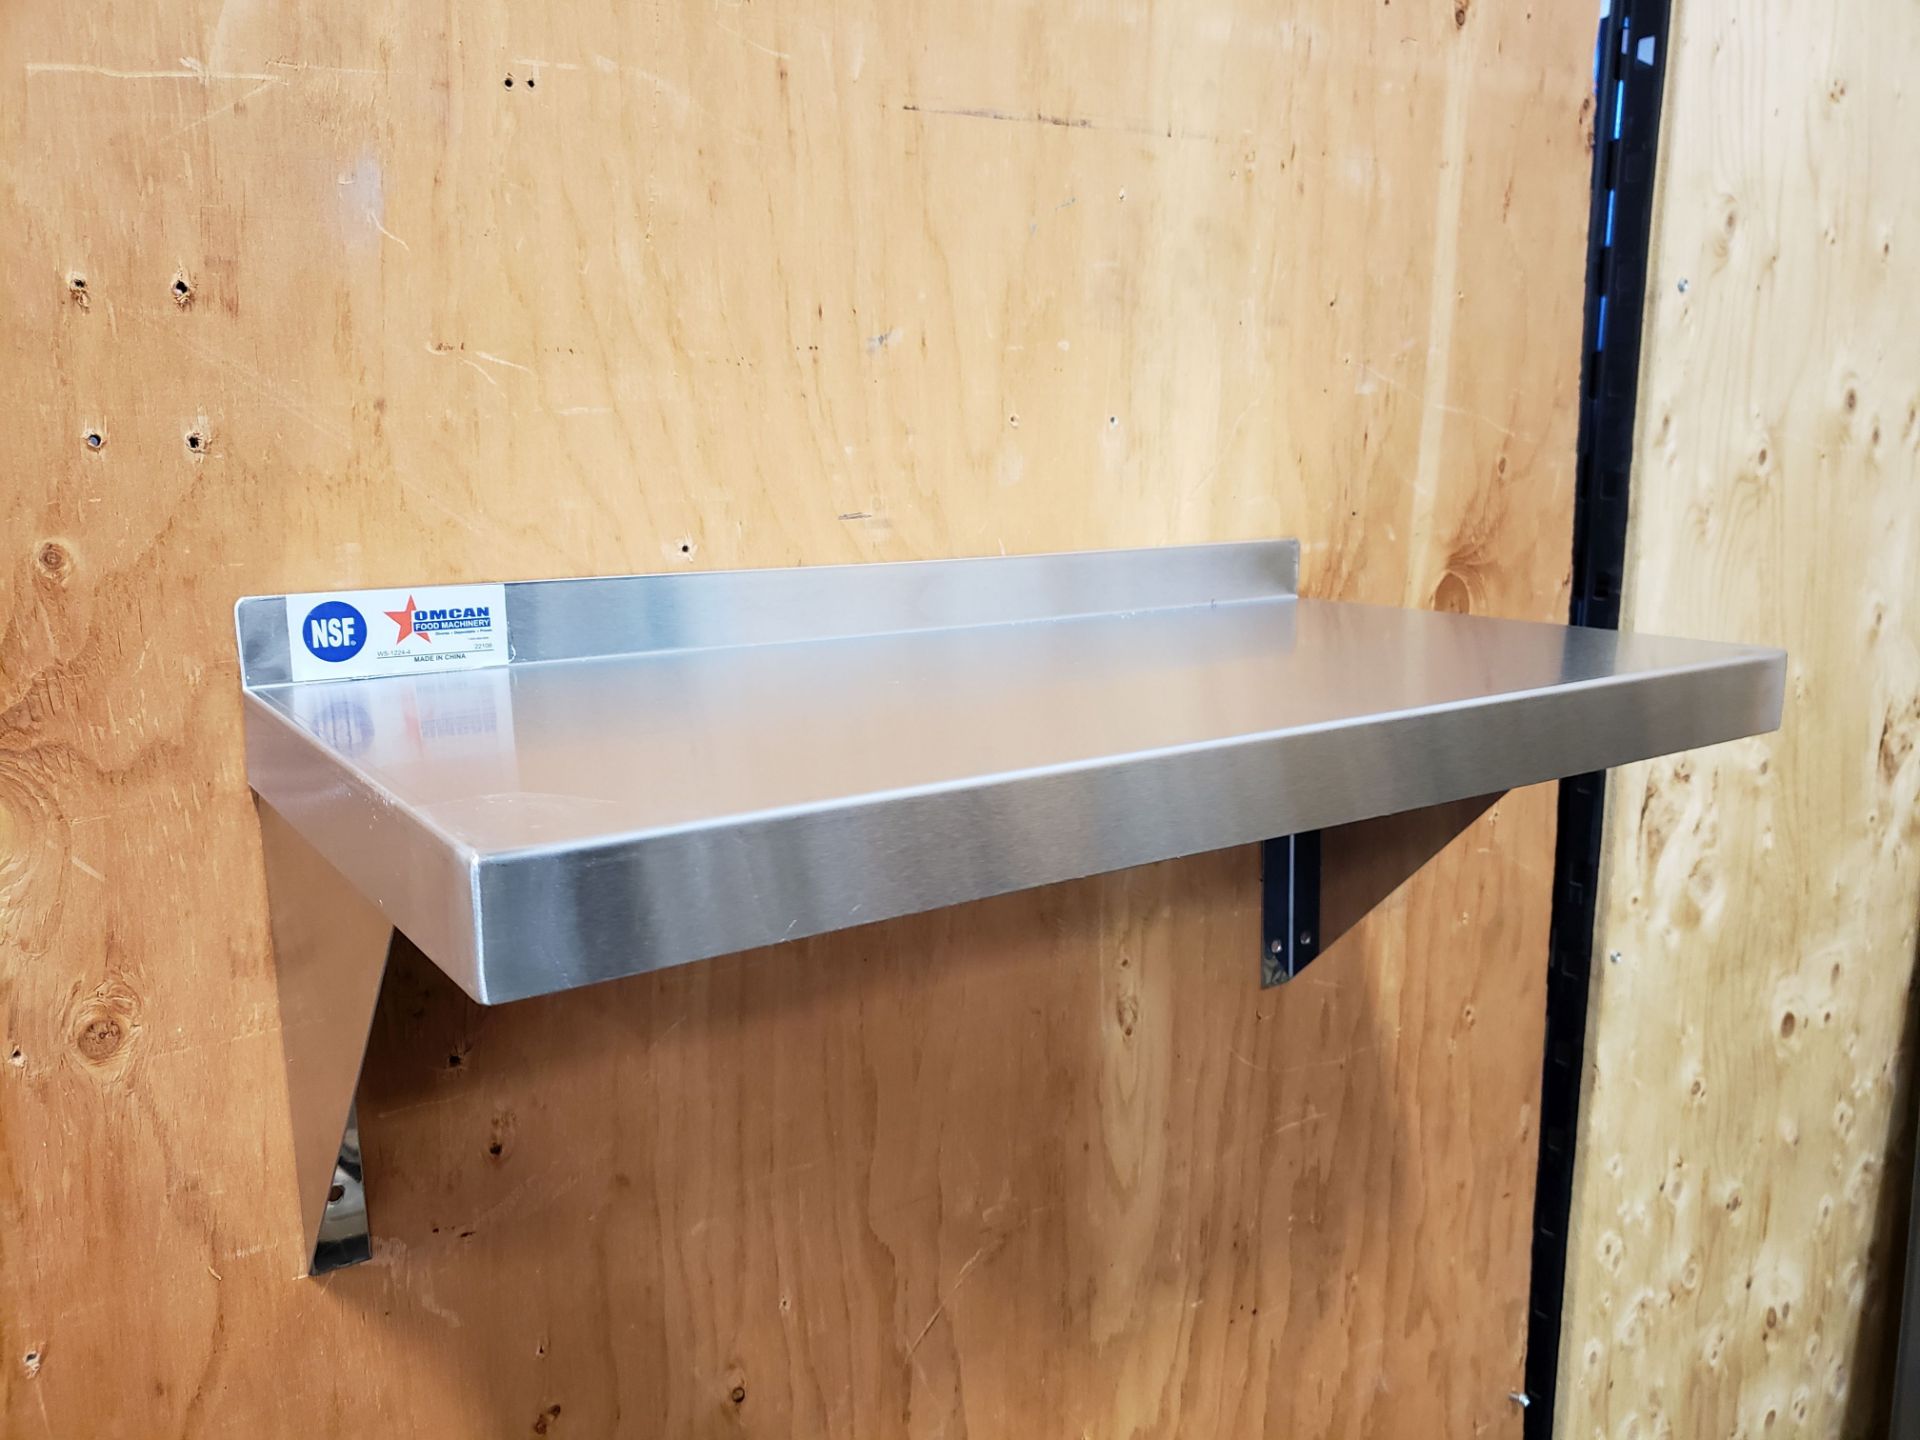 12.75" x 24" Stainless Steel Wall Shelves - Lot of 2